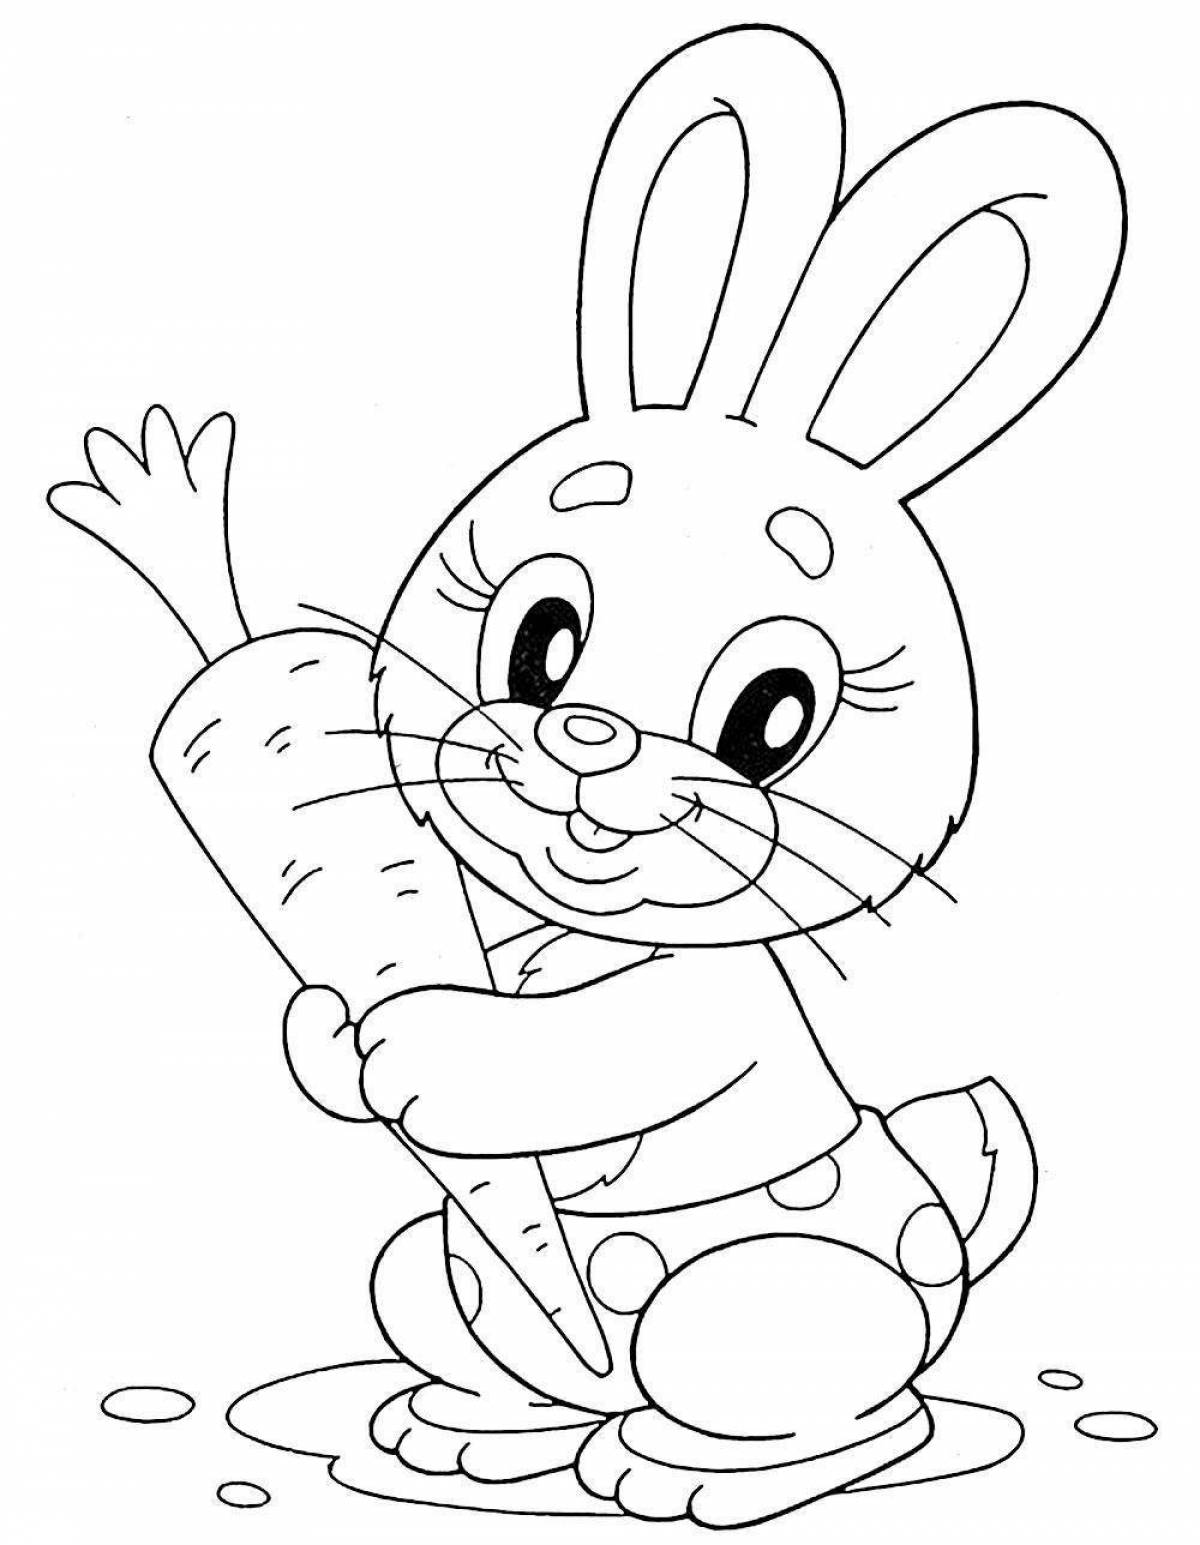 Amazing craybaby coloring page